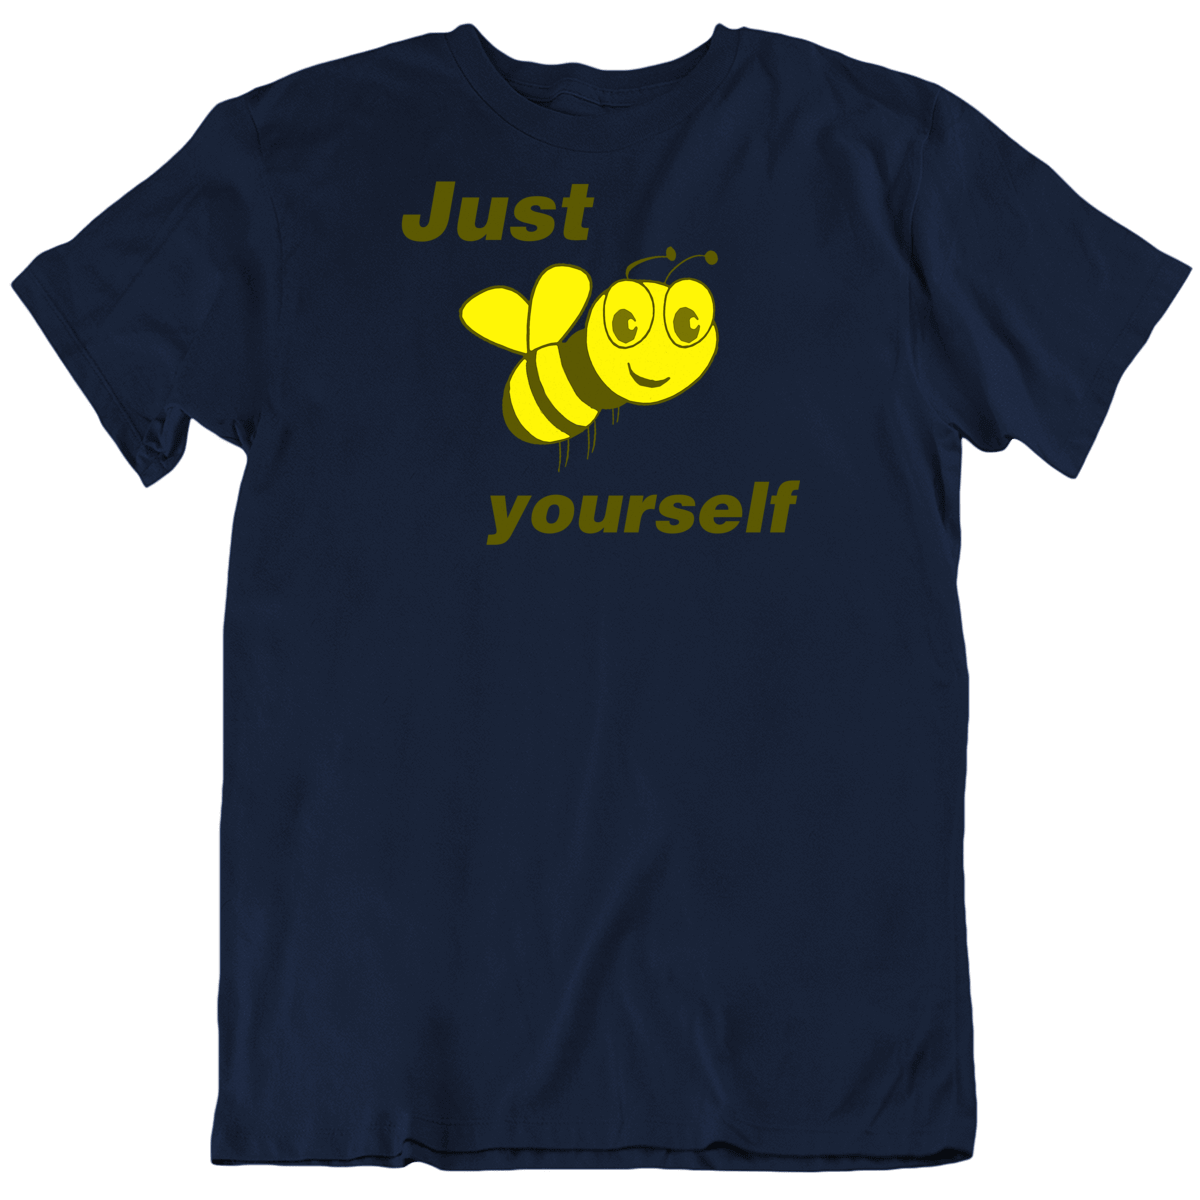 Just Bee Yourself Funny Love T Shirt